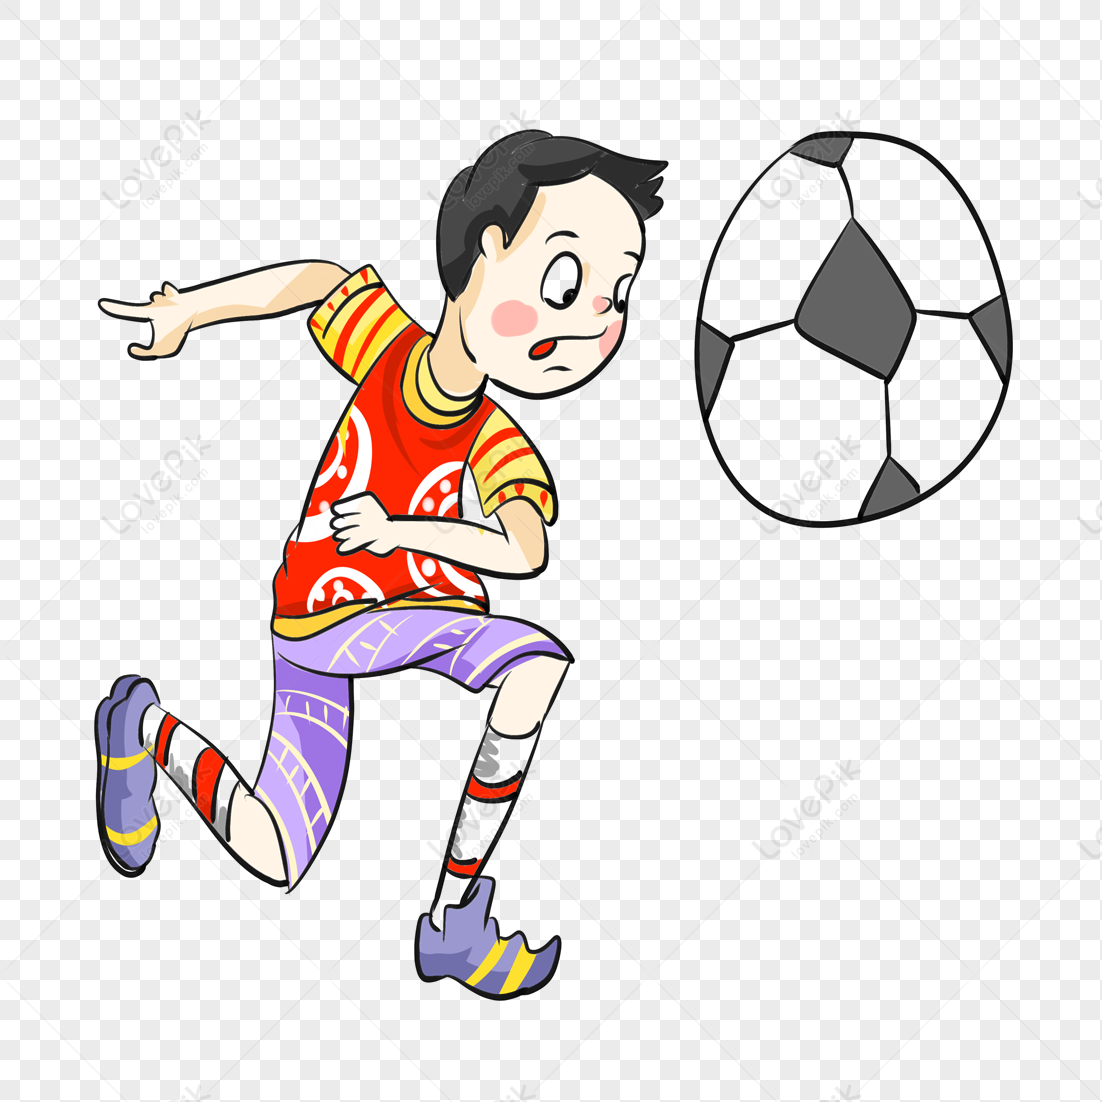 Kicking A Football Boy PNG Picture And Clipart Image For Free Download ...